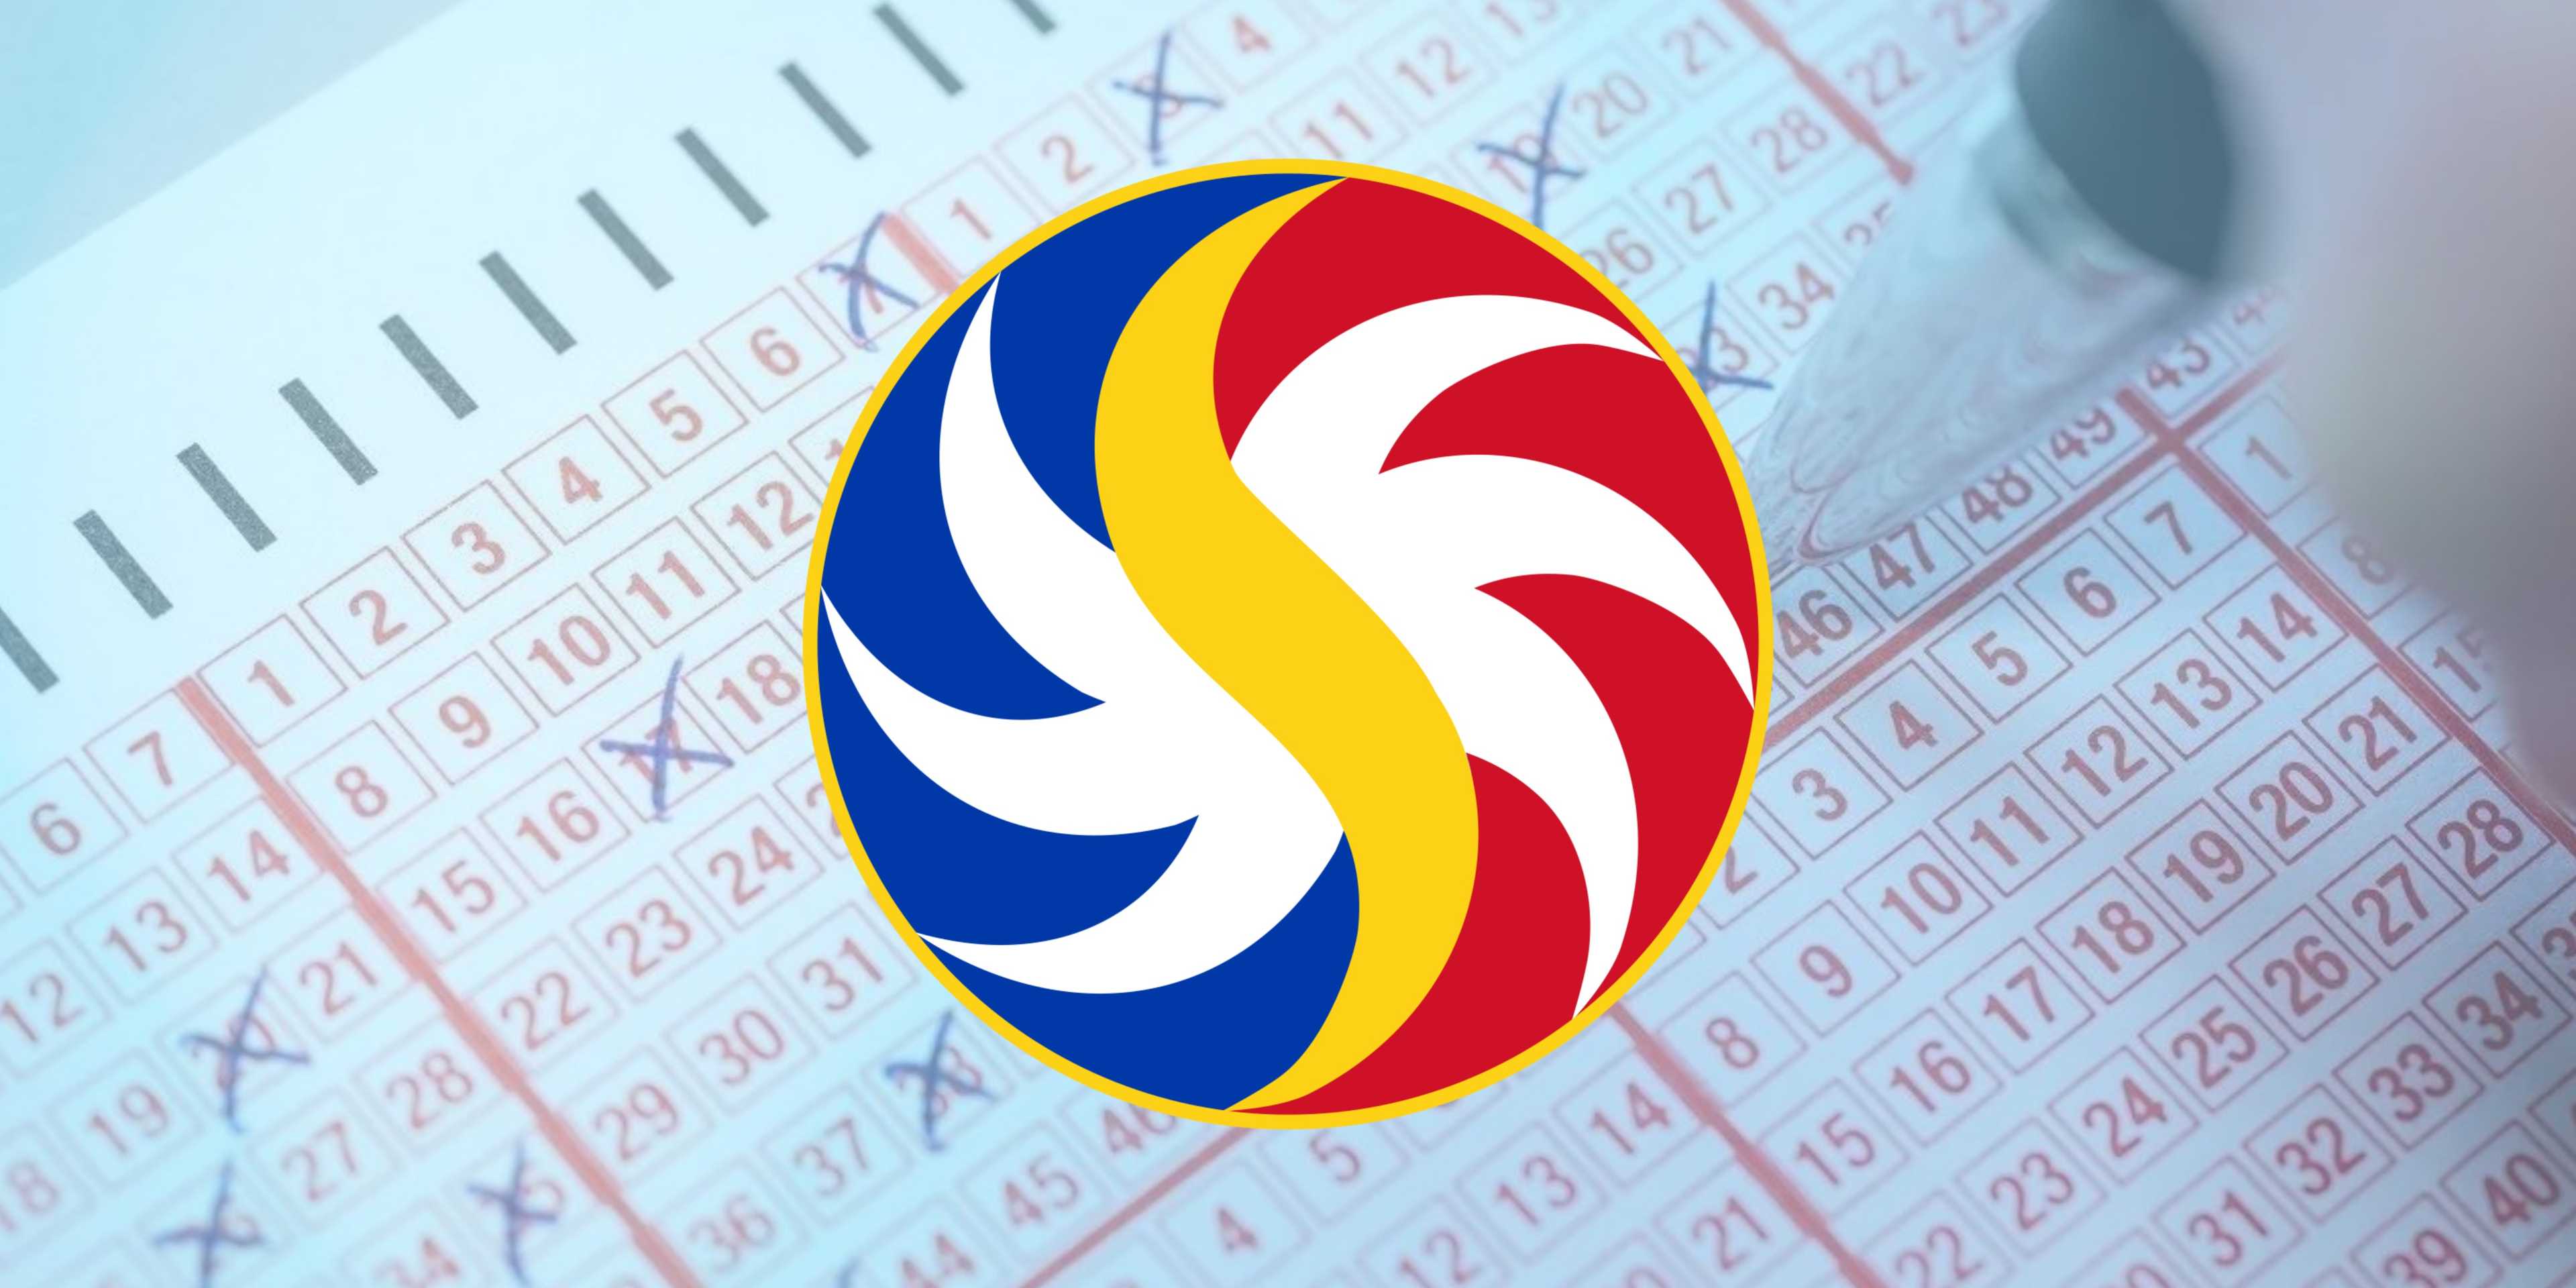 PCSO Lotto Draw Results on Tuesday, March 19